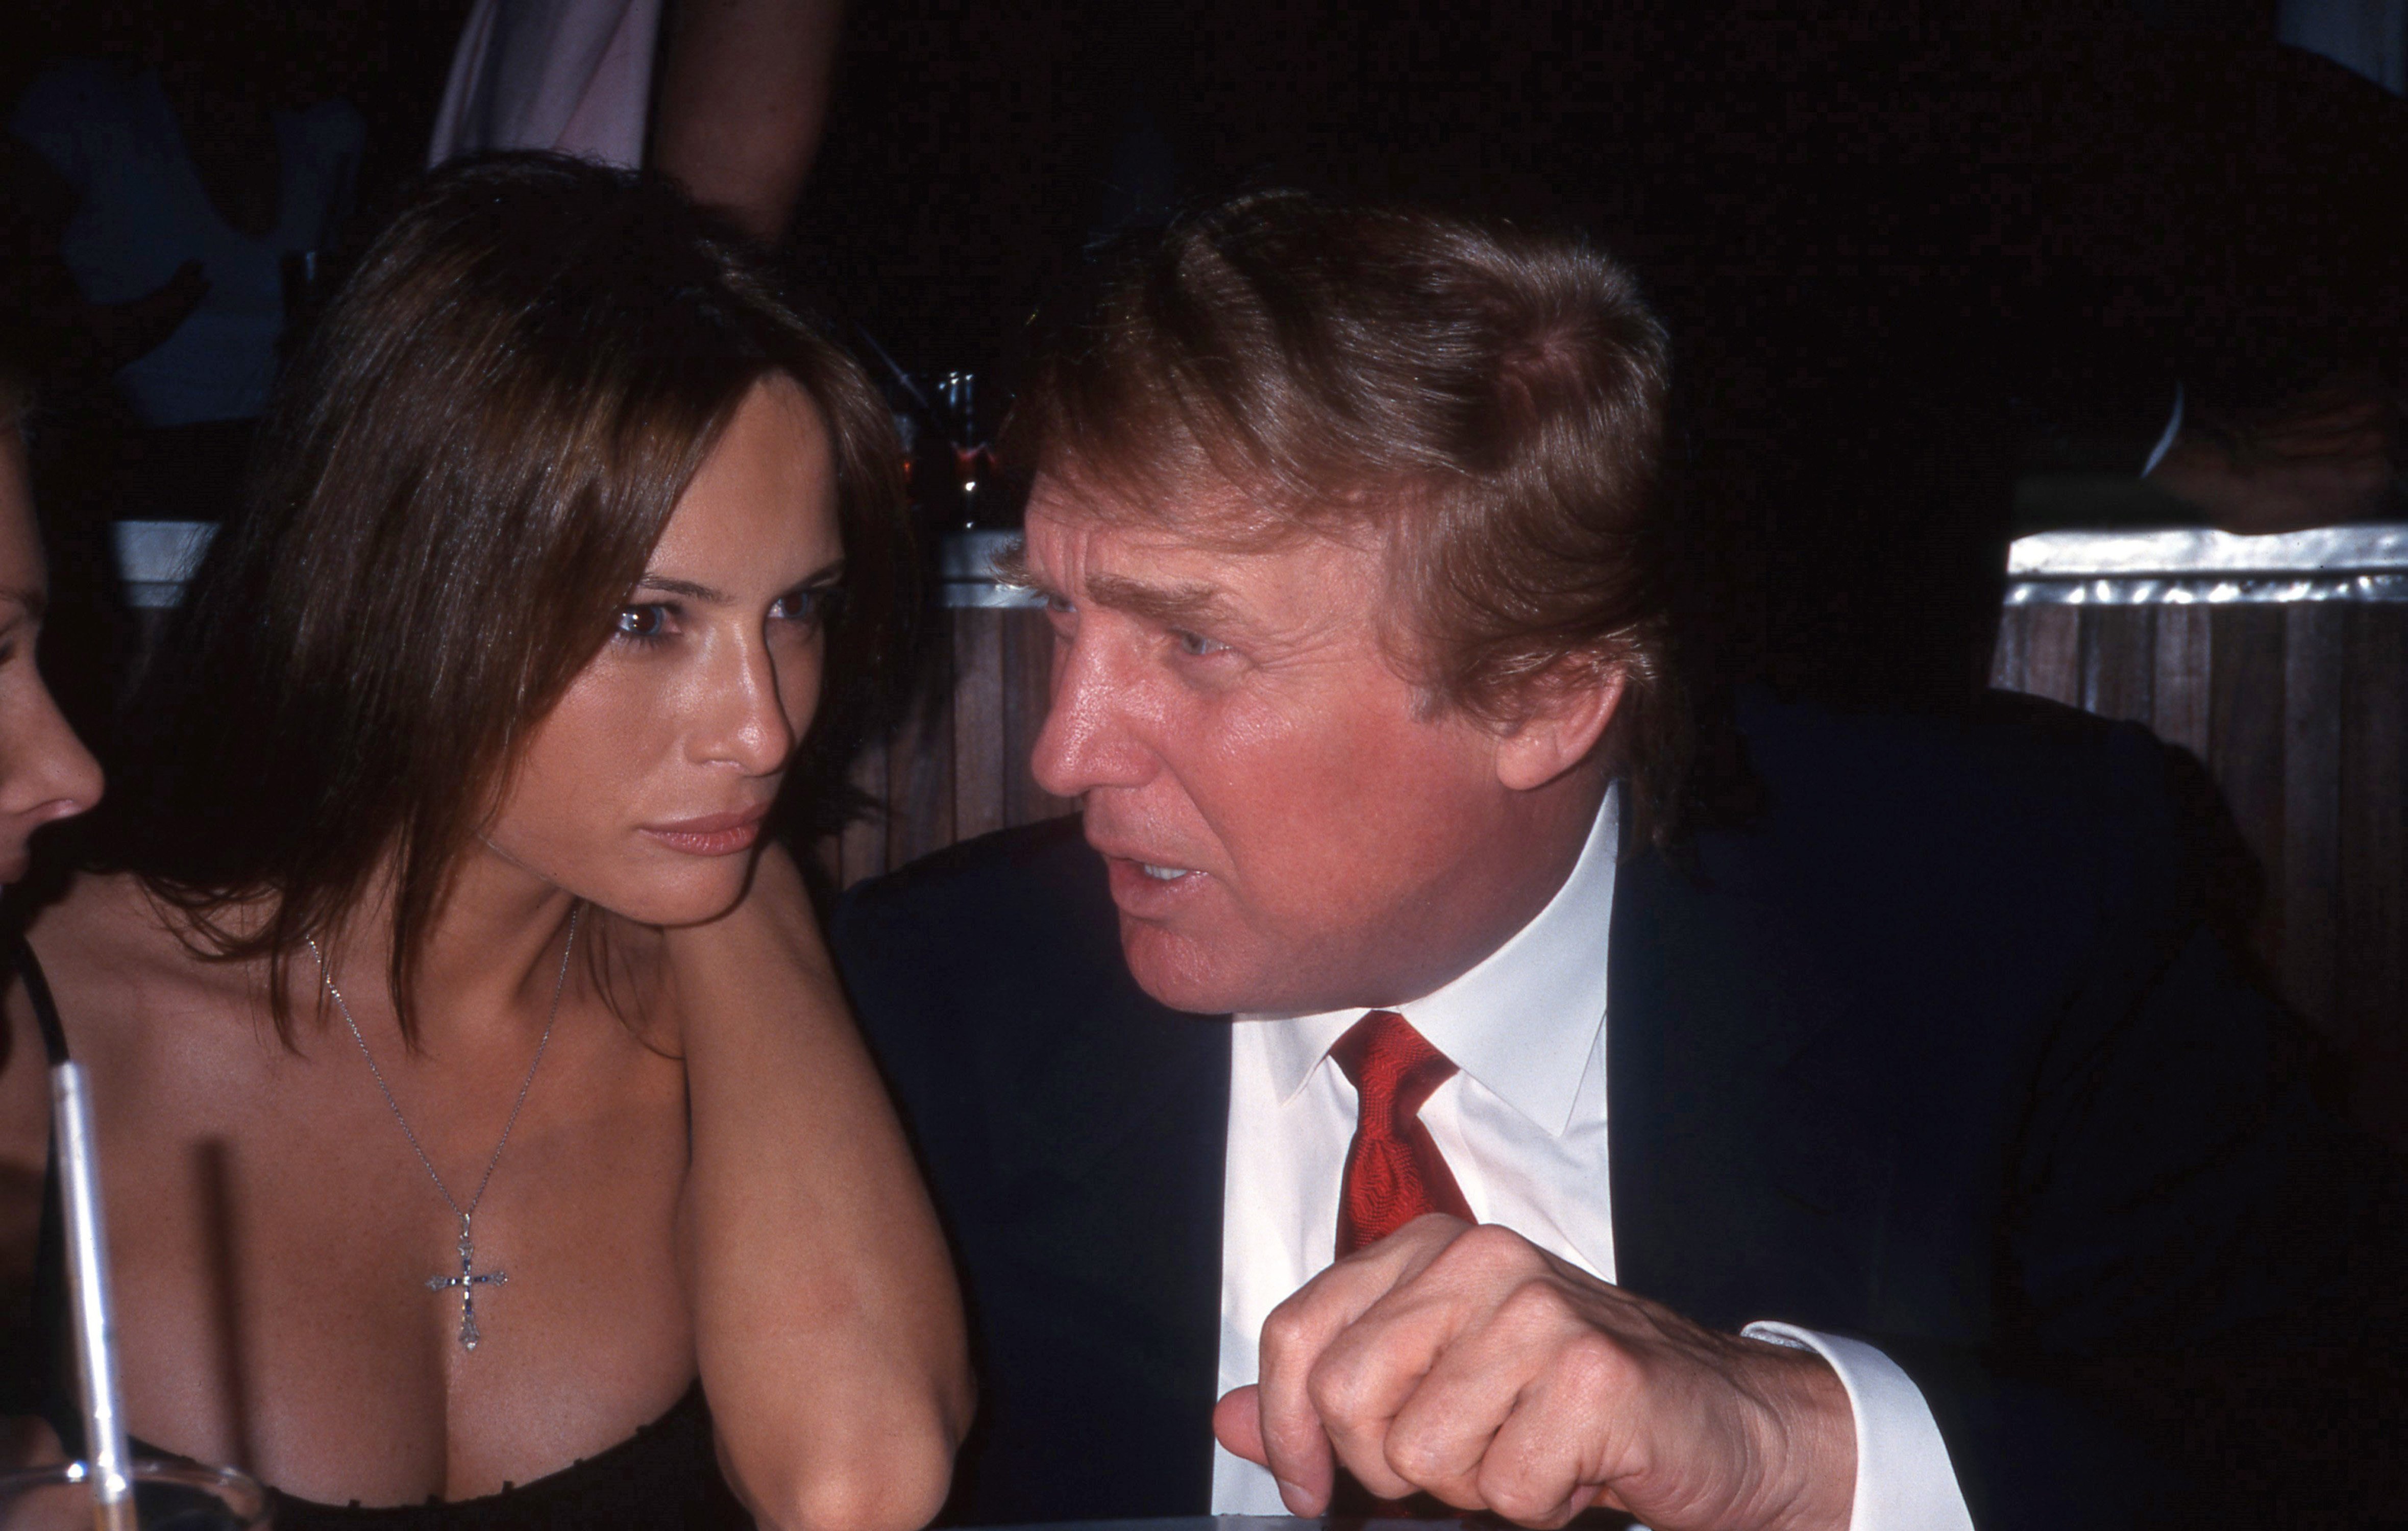 Melania Trum (nee Knauss) and Donald Trump in New York in 2002 | Source: Getty Images